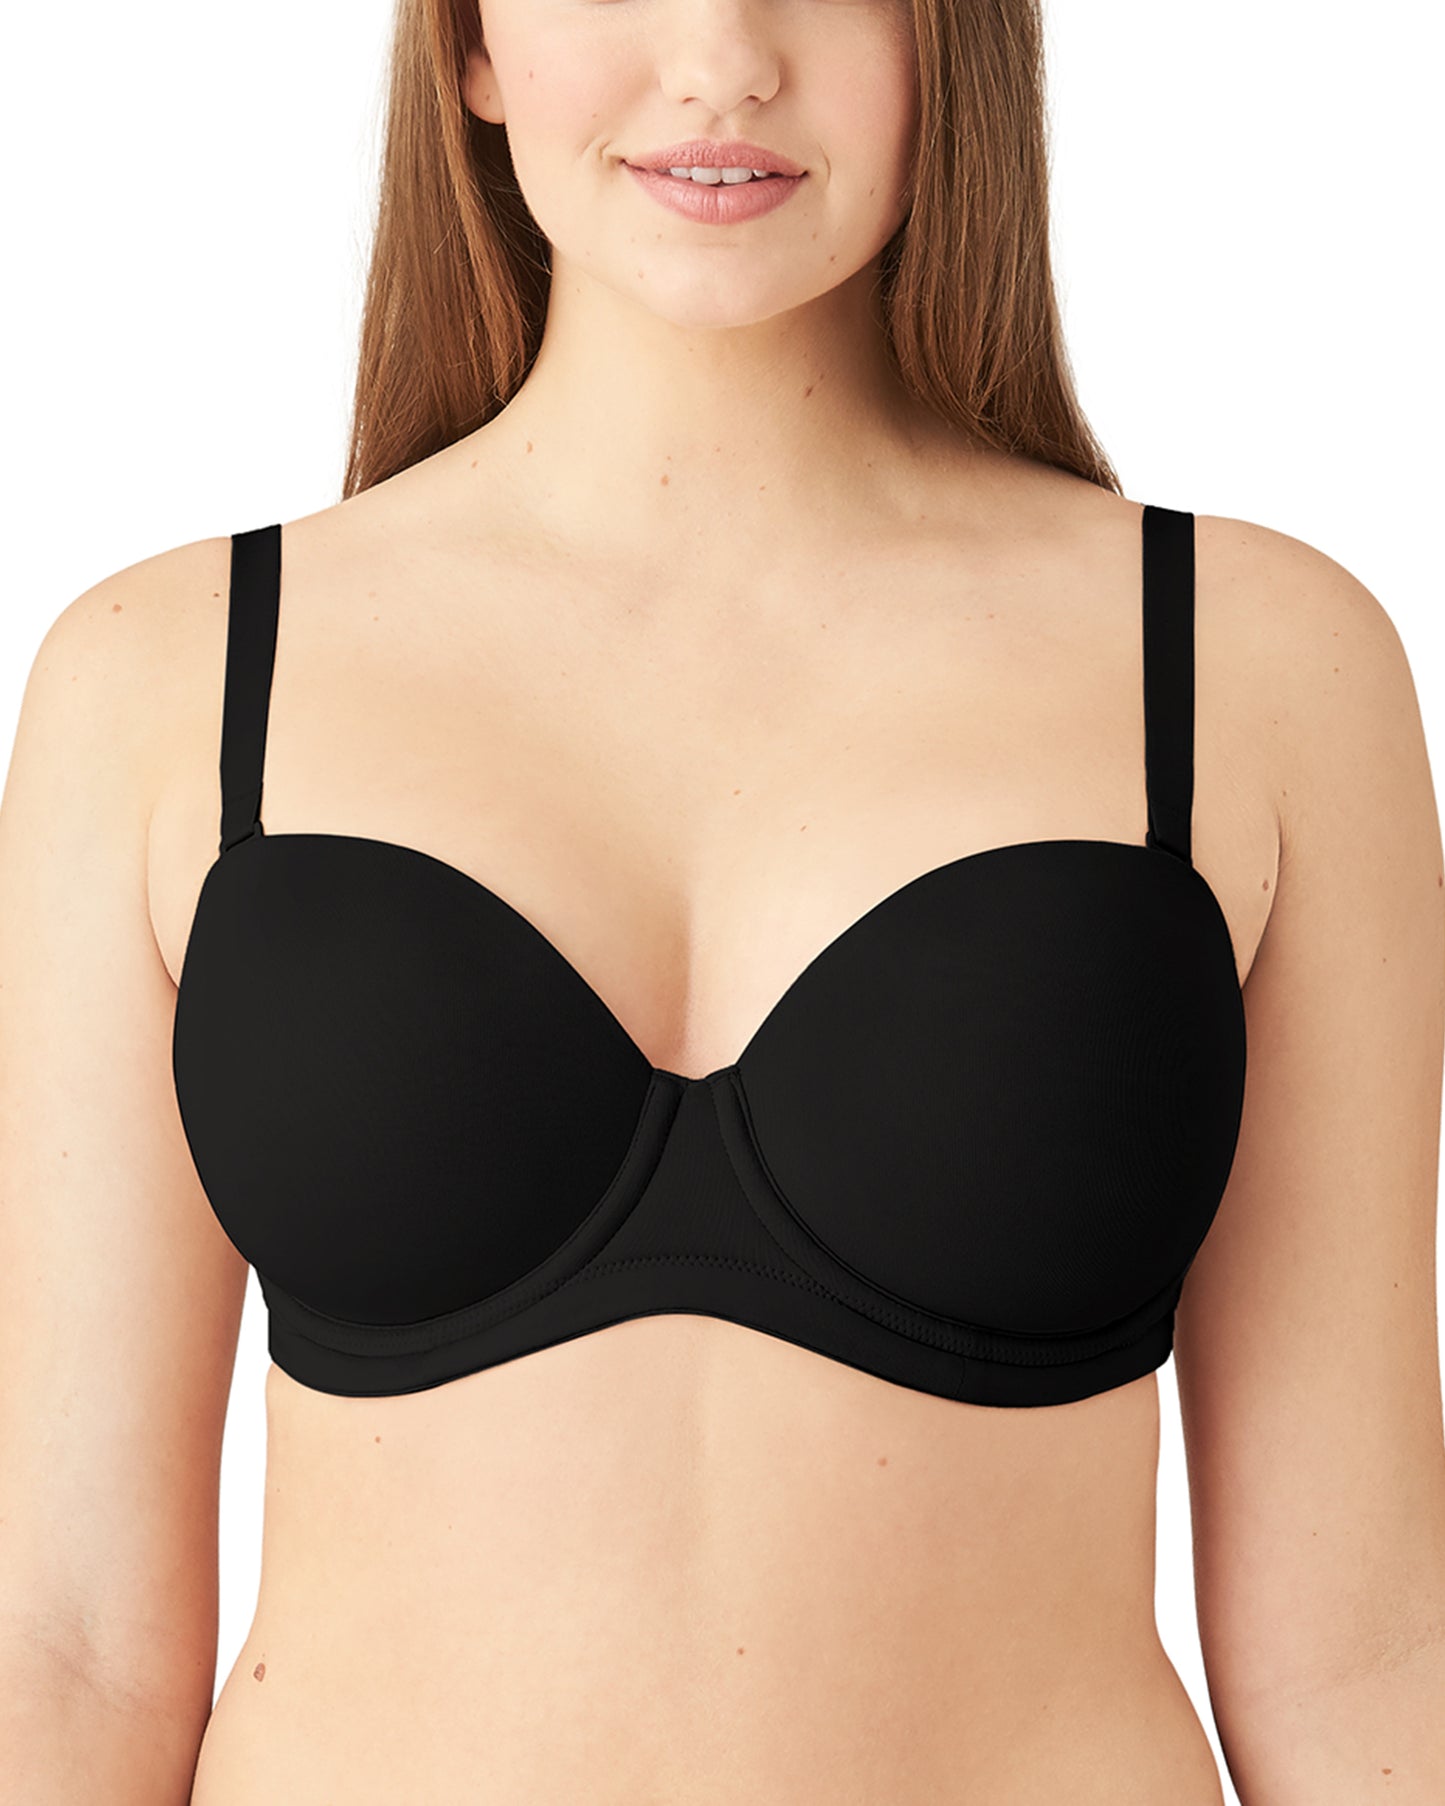 Wacoal Red Carpet Strapless Underwire Bra (More colors available) - 854119 - Black